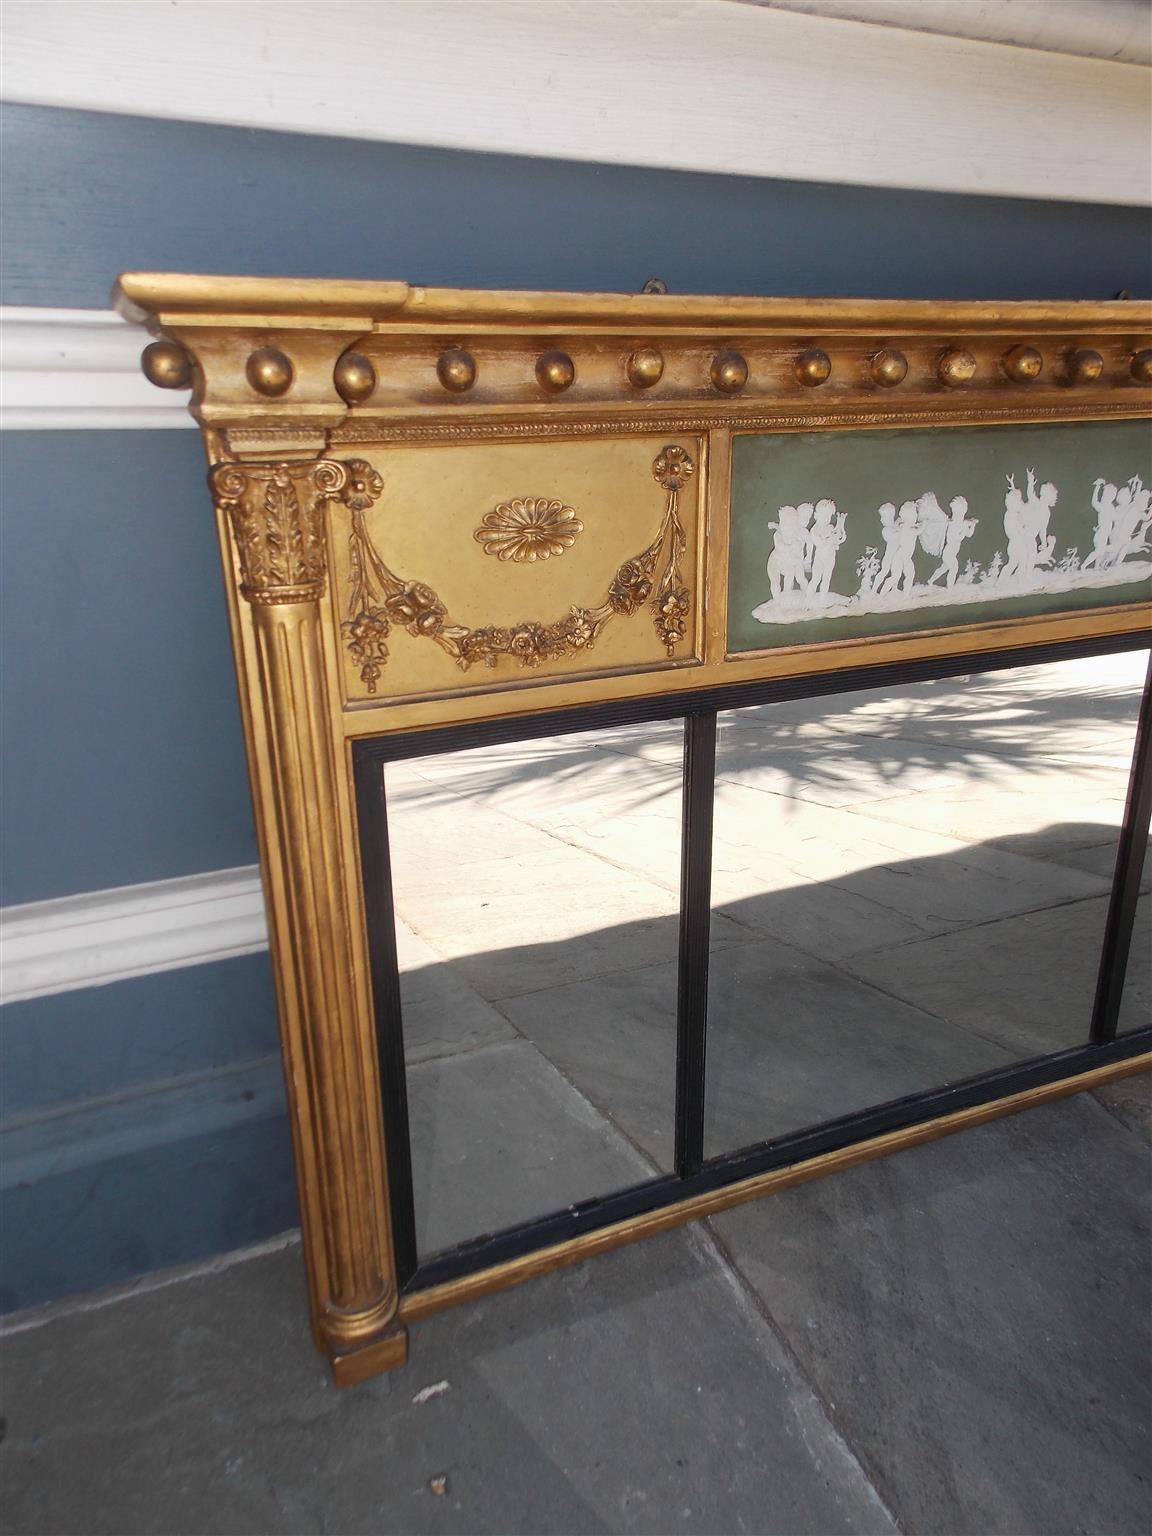 Early 19th Century English Gilt Carved Wood and Jasper Ware Over Mantel Mirror, Circa 1810 For Sale